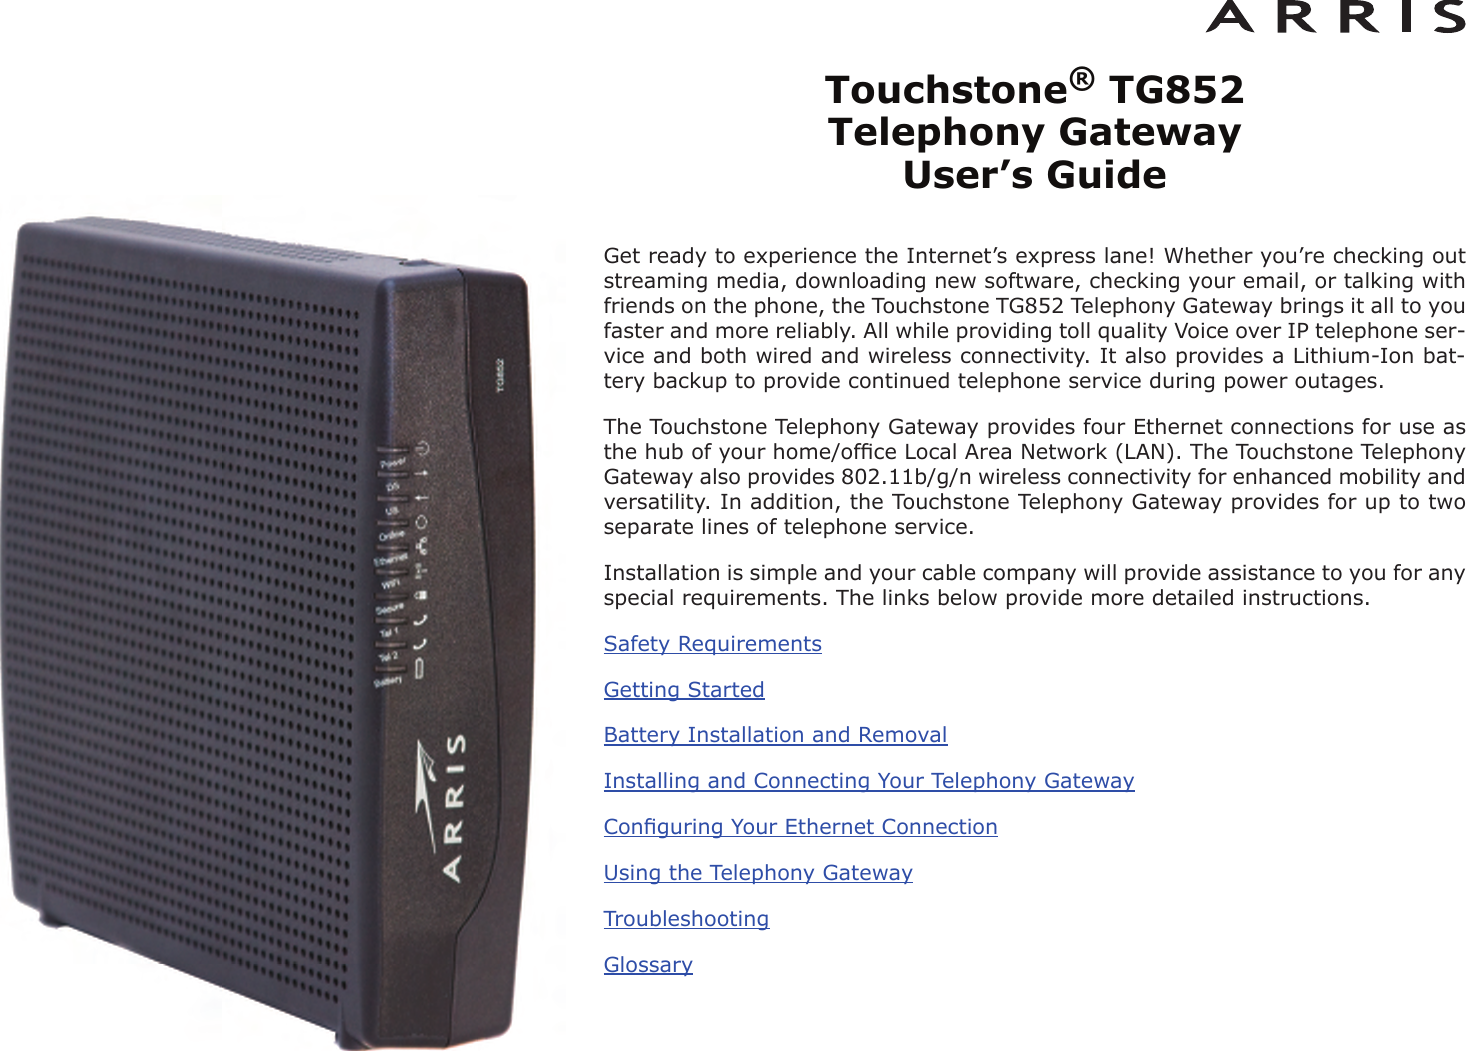 Touchstone®TG852 Telephony Gateway User’s GuideGet ready to experience the Internet’s express lane! Whether you’re checking outstreaming media, downloading new software, checking your email, or talking withfriends on the phone, the Touchstone TG852 Telephony Gateway brings it all to youfaster and more reliably. All while providing toll quality Voice over IP telephone ser -vice and both wired and wireless connectivity. It also provides a Lithi um-Ion bat-tery backup to provide continued telephone service during power outages.The Touchstone Telephony Gateway provides four Ethernet connections for use asthe hub of your home/ofﬁce Local Area Network (LAN). The Touchstone TelephonyGateway also provides 802.11b/g/n wireless connectivity for enhanced mobility andversatility. In addition, the Touchstone Telephony Gateway provides for up to twoseparate lines of telephone service.Installation is simple and your cable company will provide assistance to you for anyspecial requirements. The links below provide more detailed instructions.Safety RequirementsGetting StartedBattery Installation and RemovalInstalling and Connecting Your Telephony GatewayConﬁguring Your Ethernet ConnectionUsing the Telephony GatewayTroubleshootingGlossary